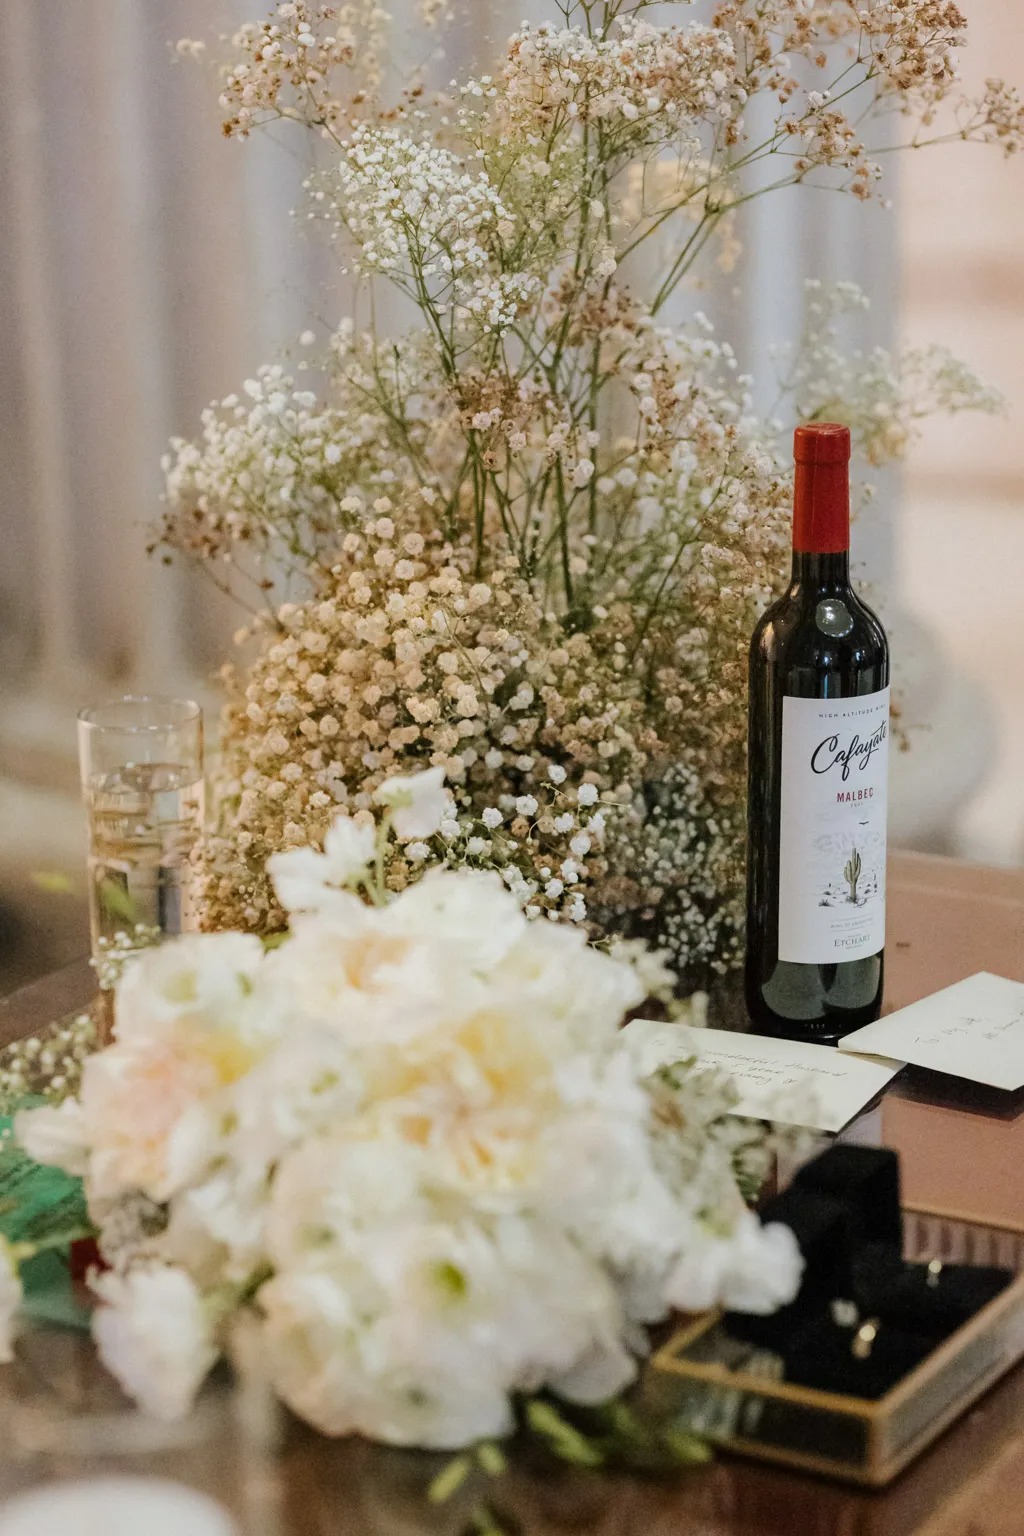 How To Write a Letter For a Wine Box Ceremony Ritual